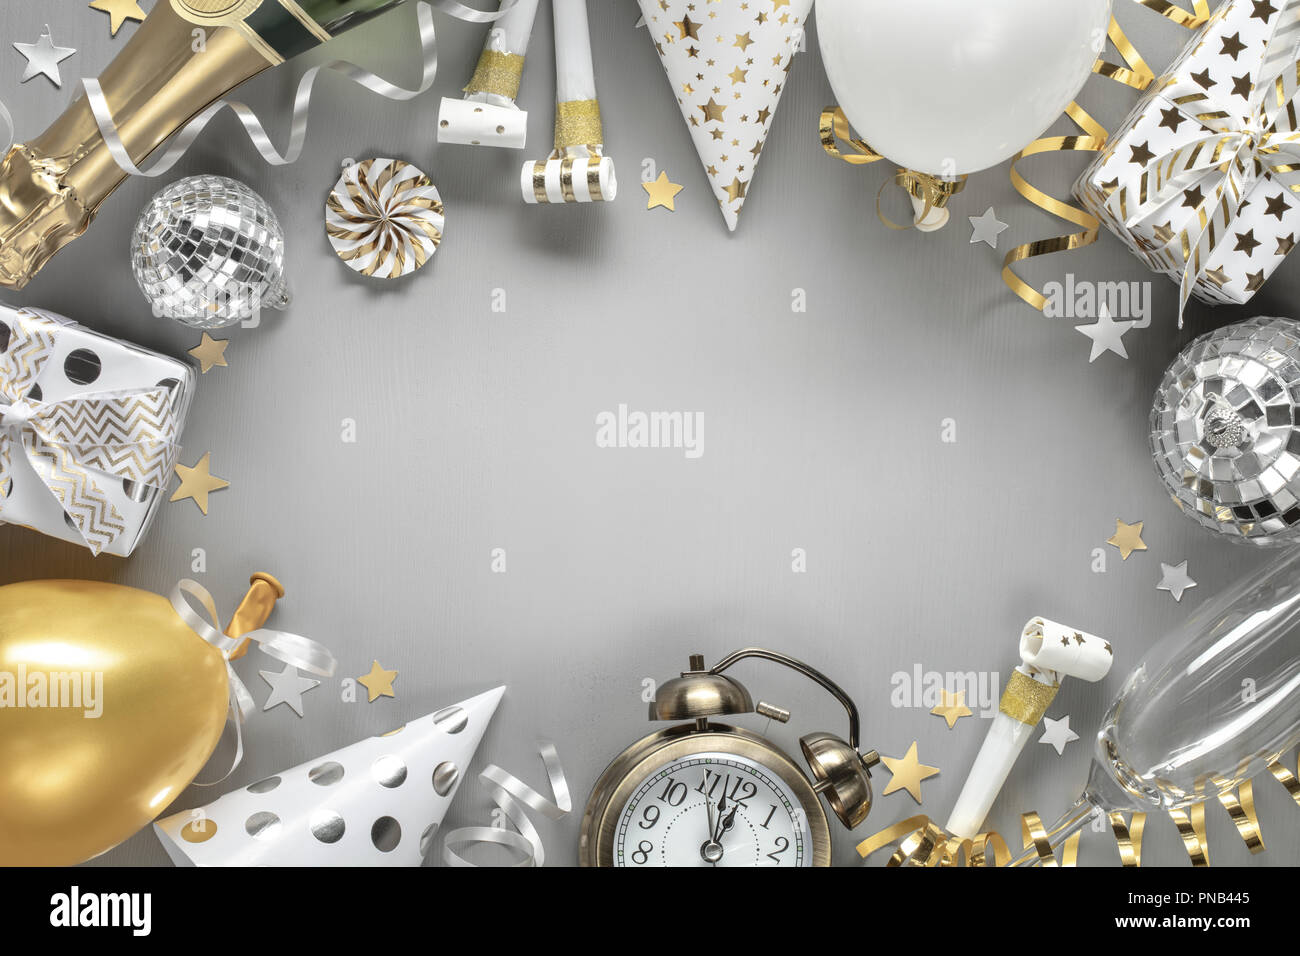 party ornaments for new year eve or other festivities Stock Photo